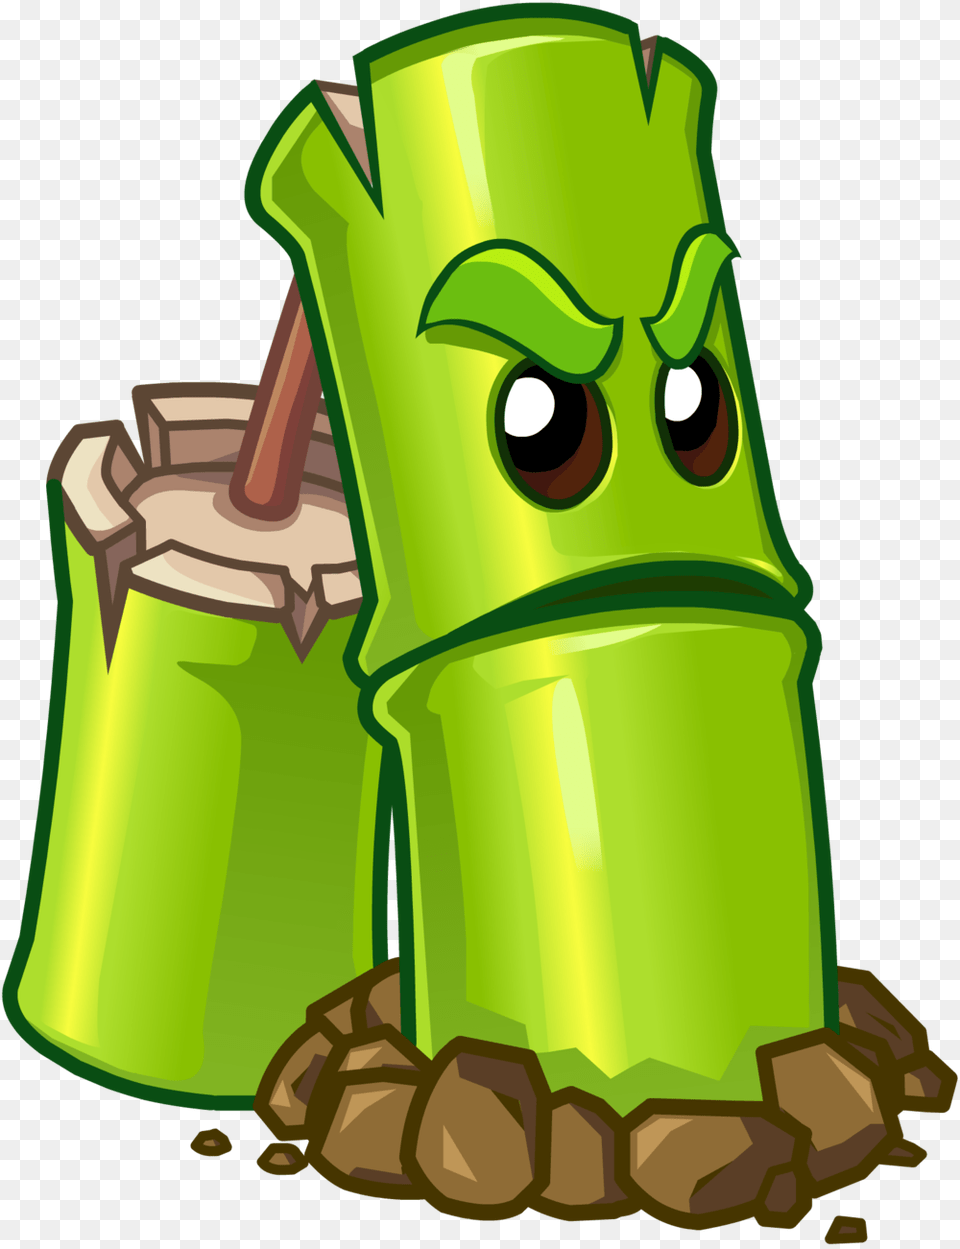 Zombies Wiki Plants Vs Zombies, Dynamite, Weapon Free Transparent Png